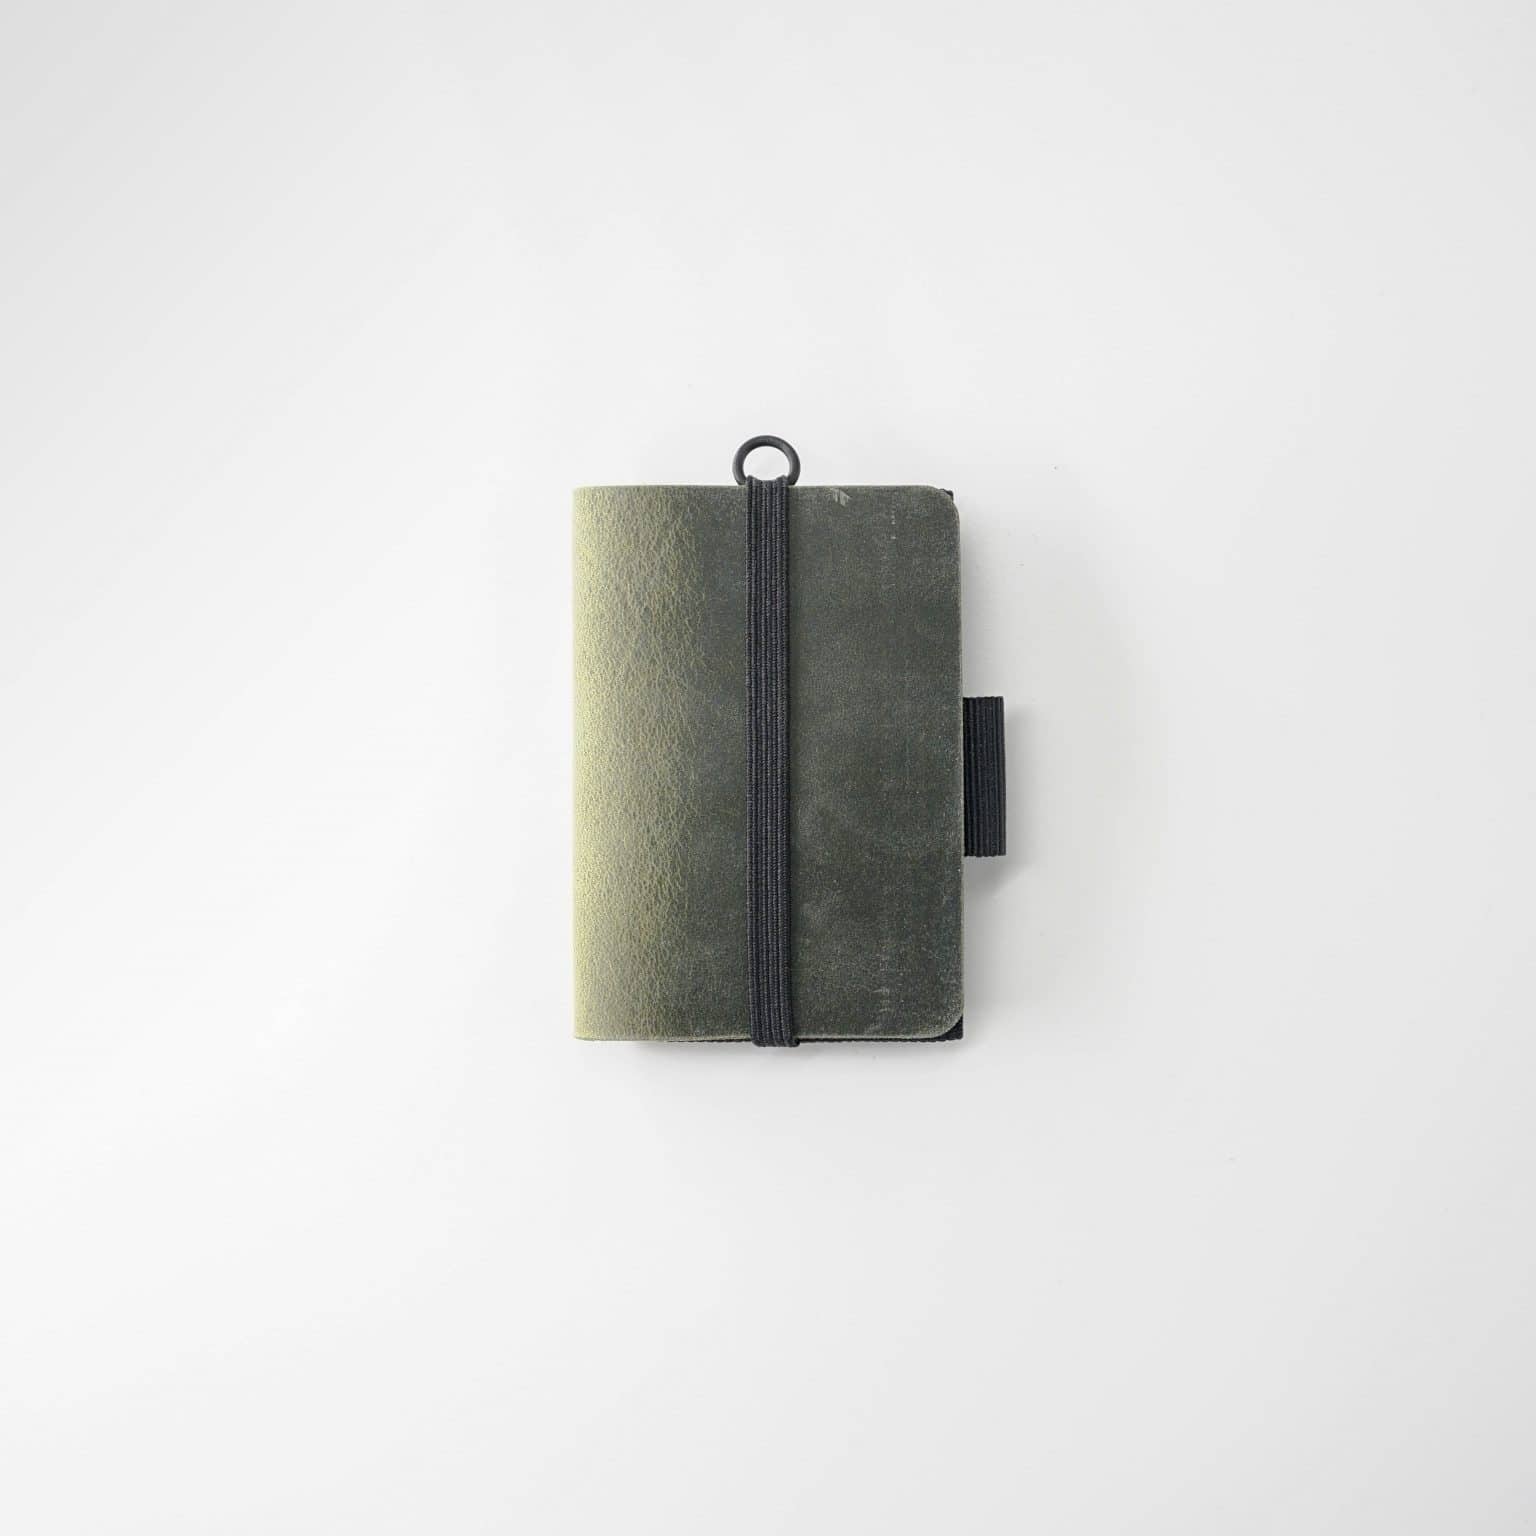 Contemporary minimalist wallet with geometric styling.